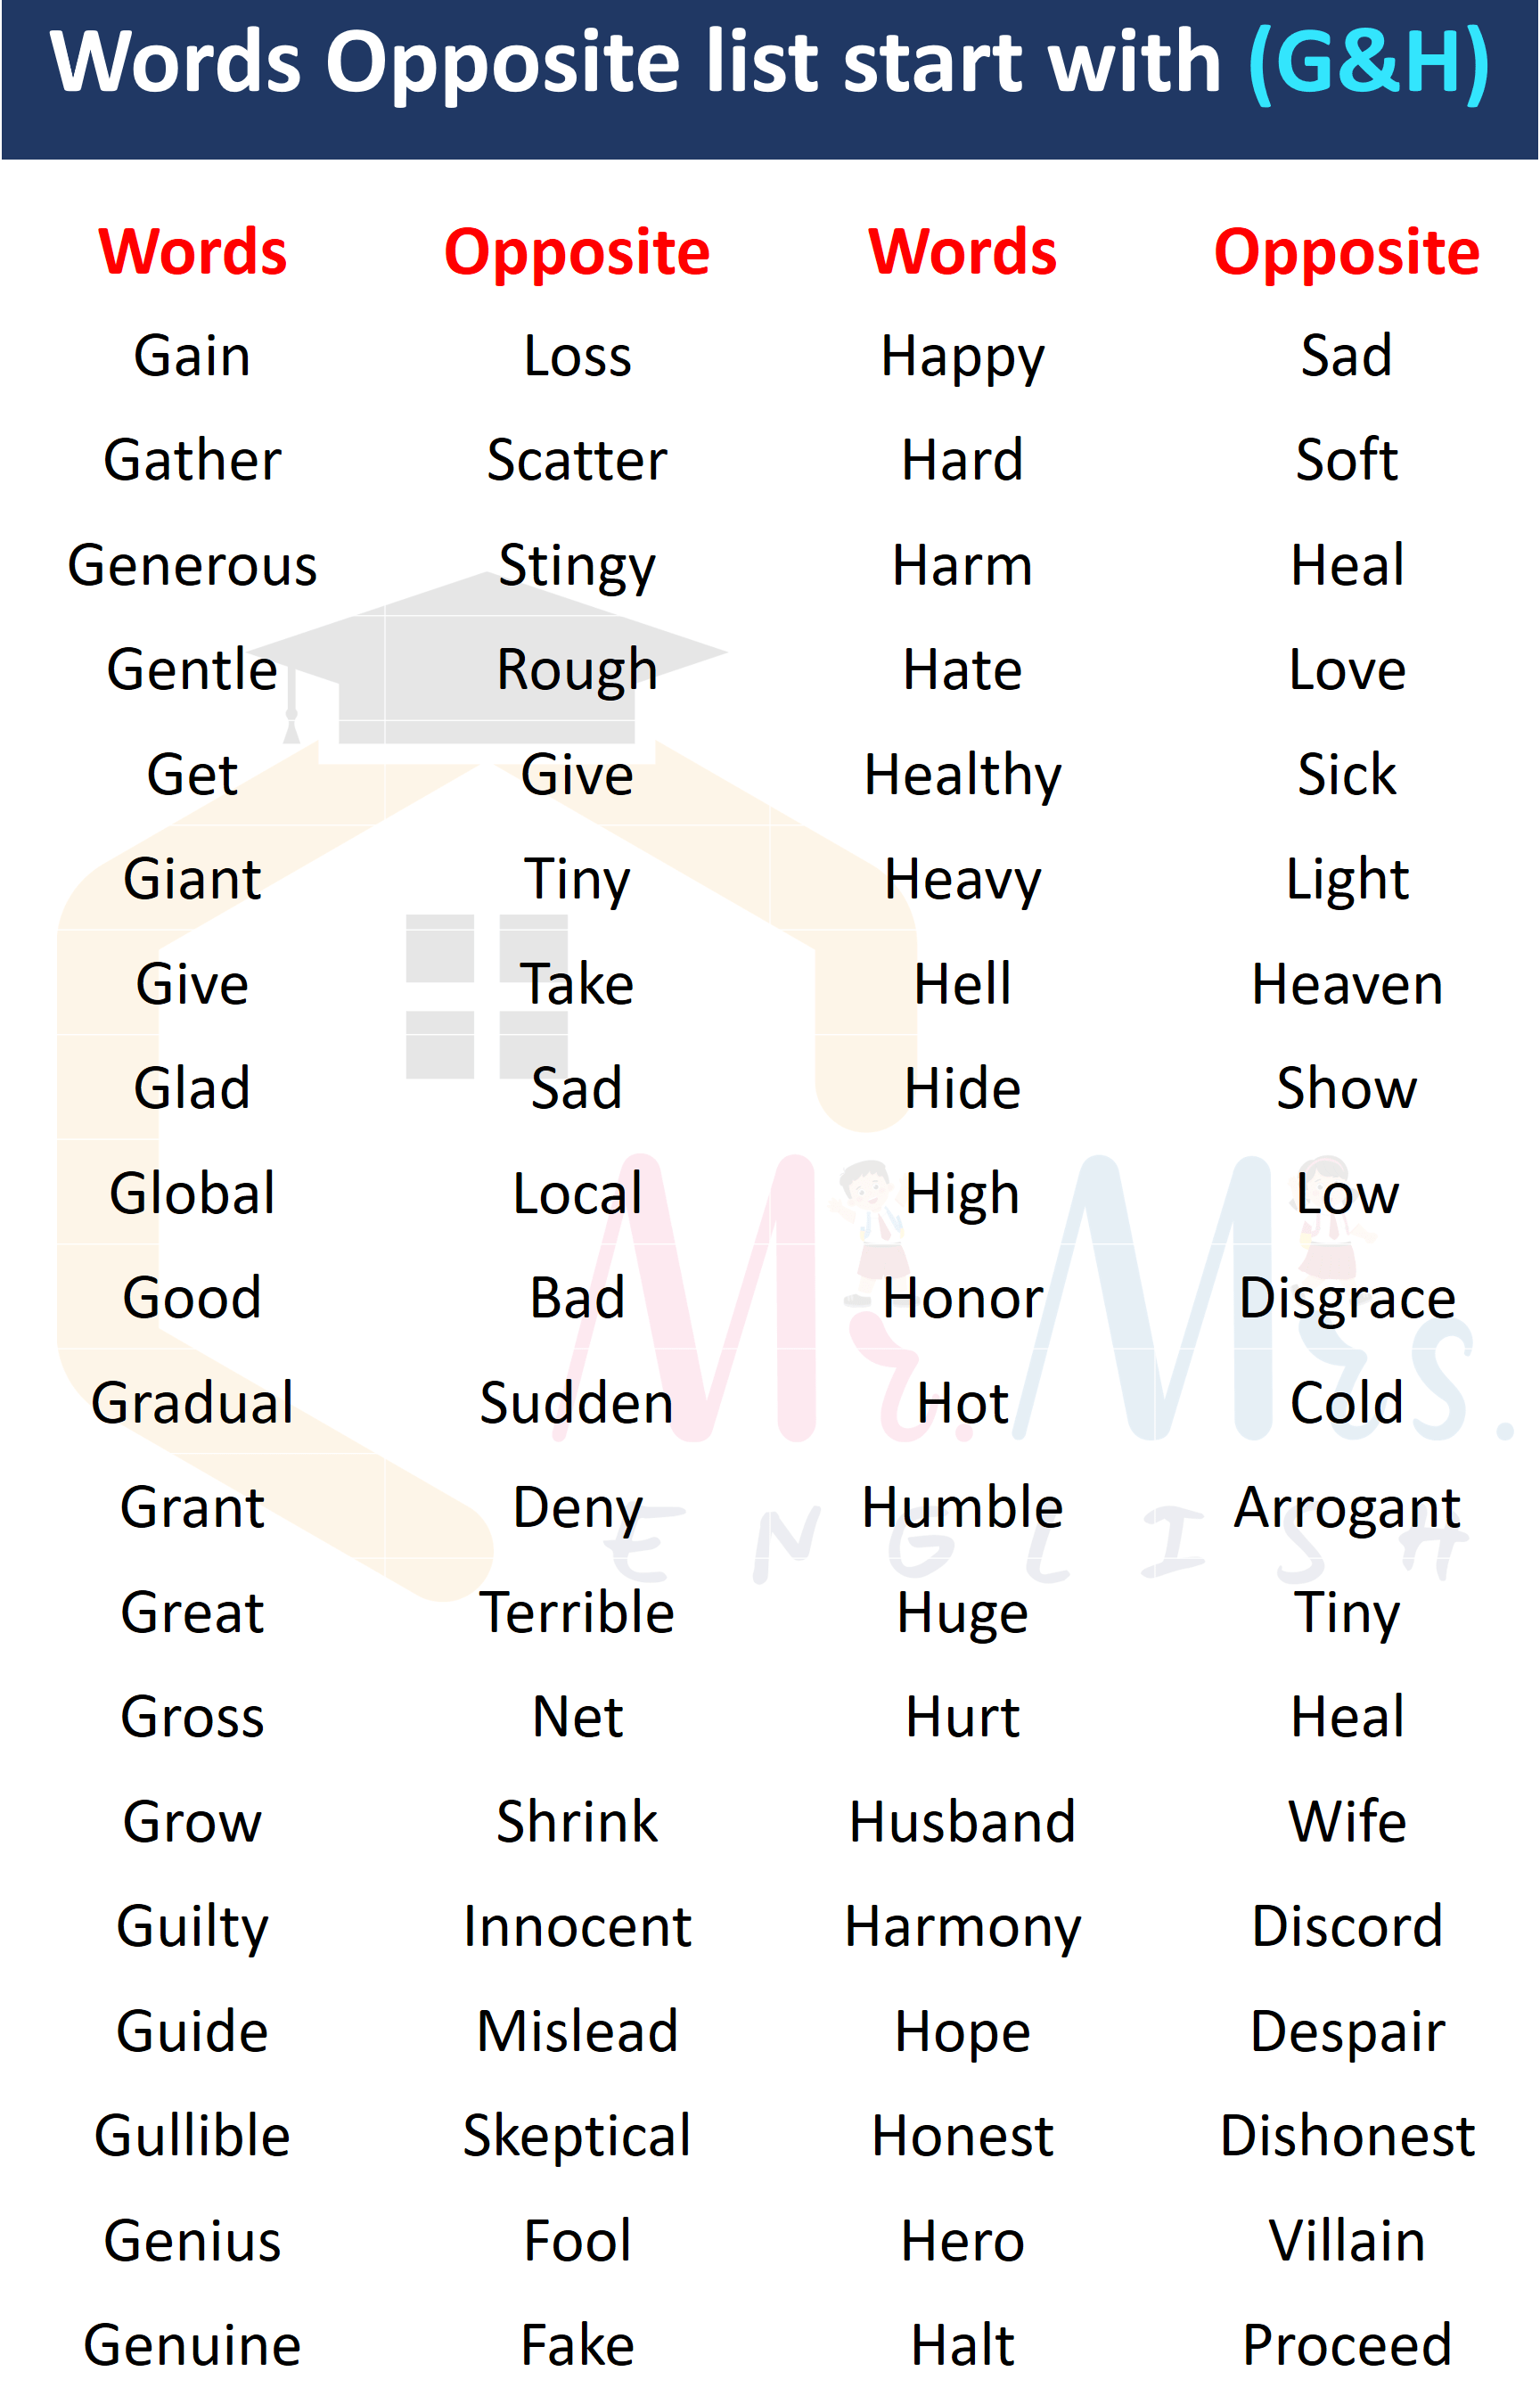 Words Opposite List From A to Z | Words Opposite G & H